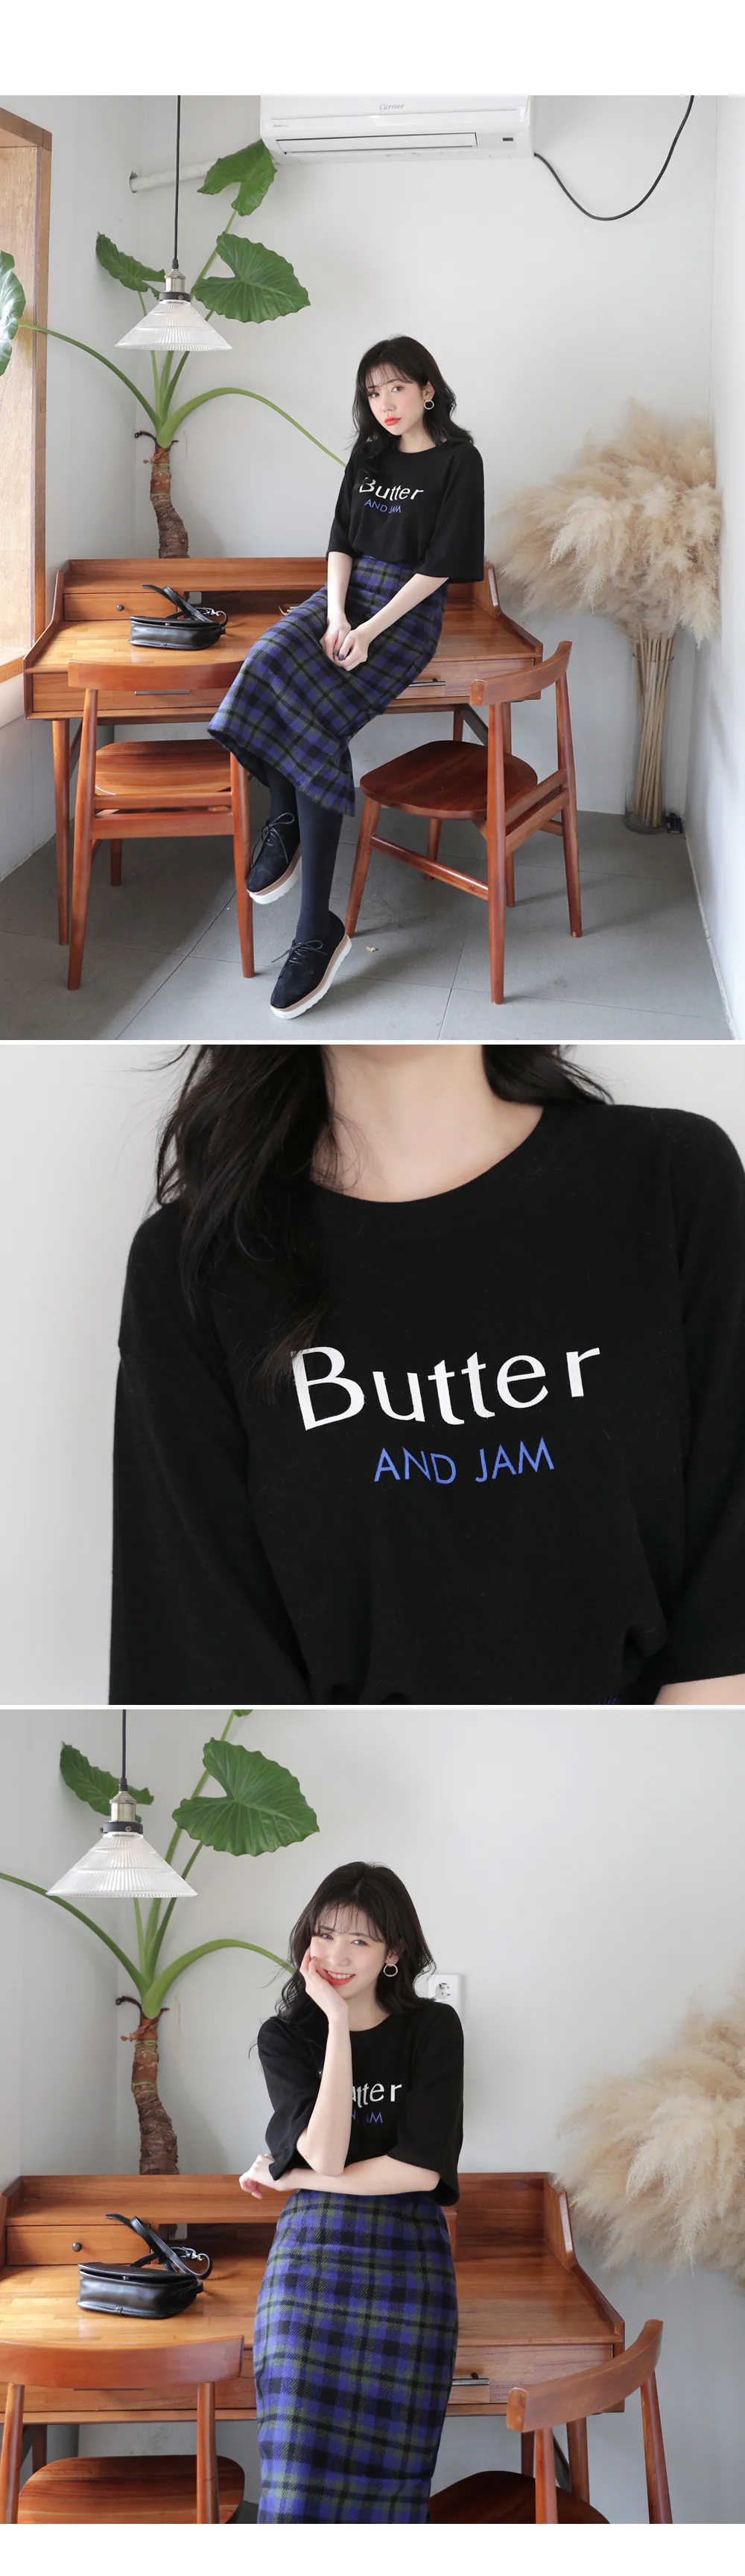 Butter AND JAMルーズTシャツ・全2色 | DHOLIC | 詳細画像2